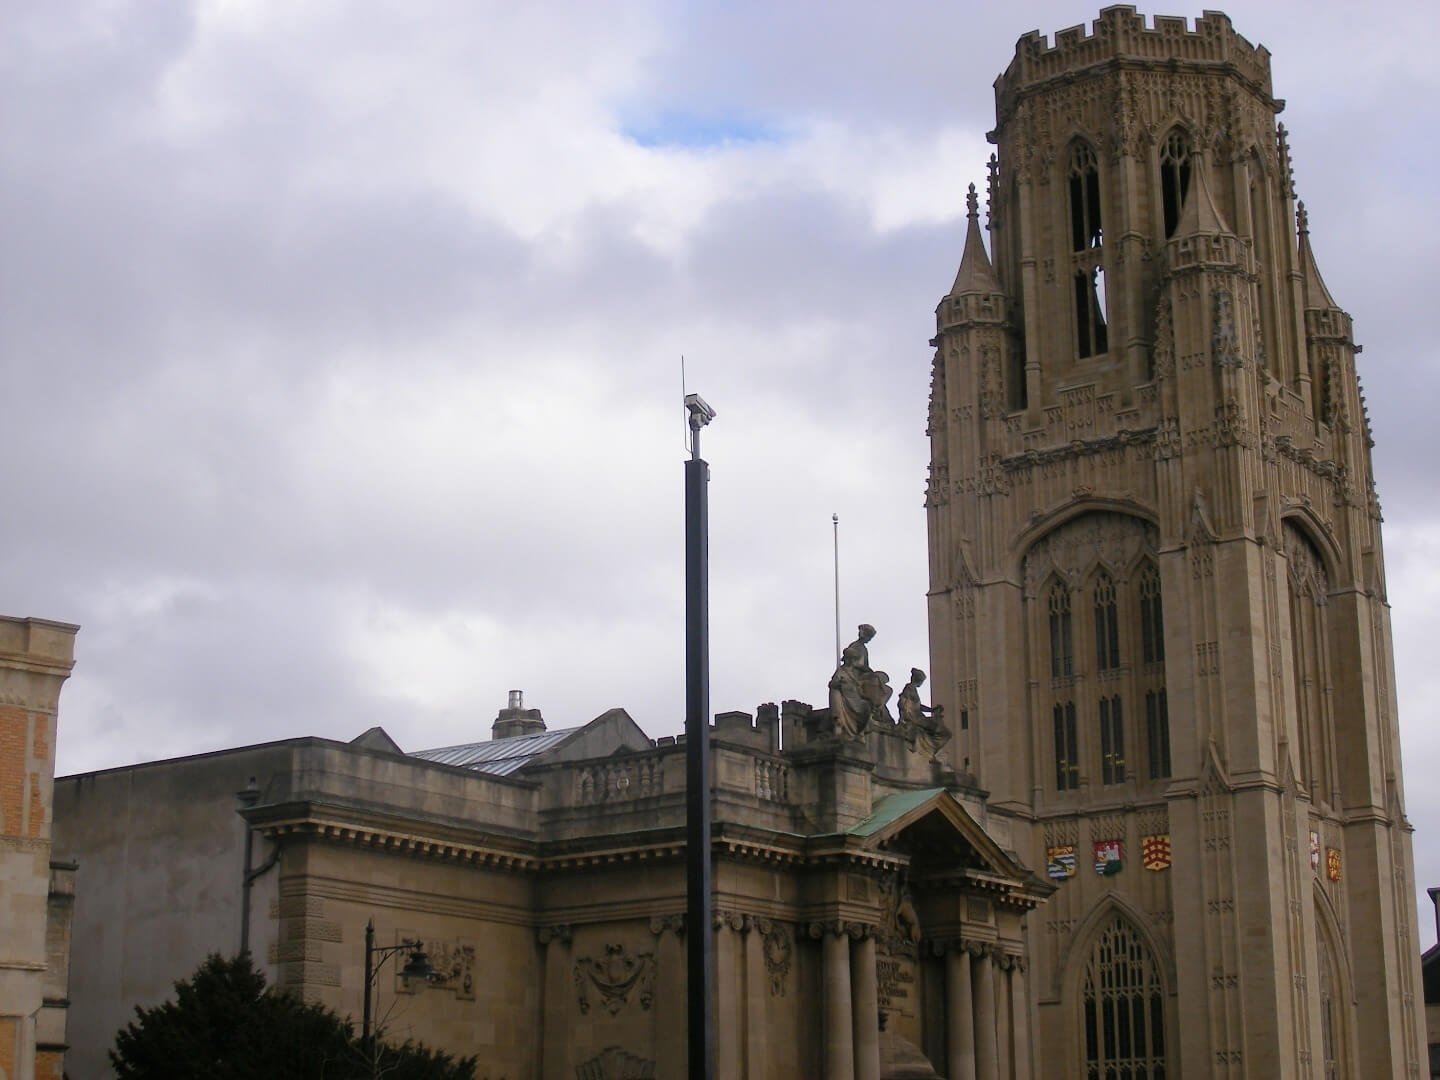 Student Accommodation in Bristol City Centre, Bristol - Bristol City Museum and Art Gallery